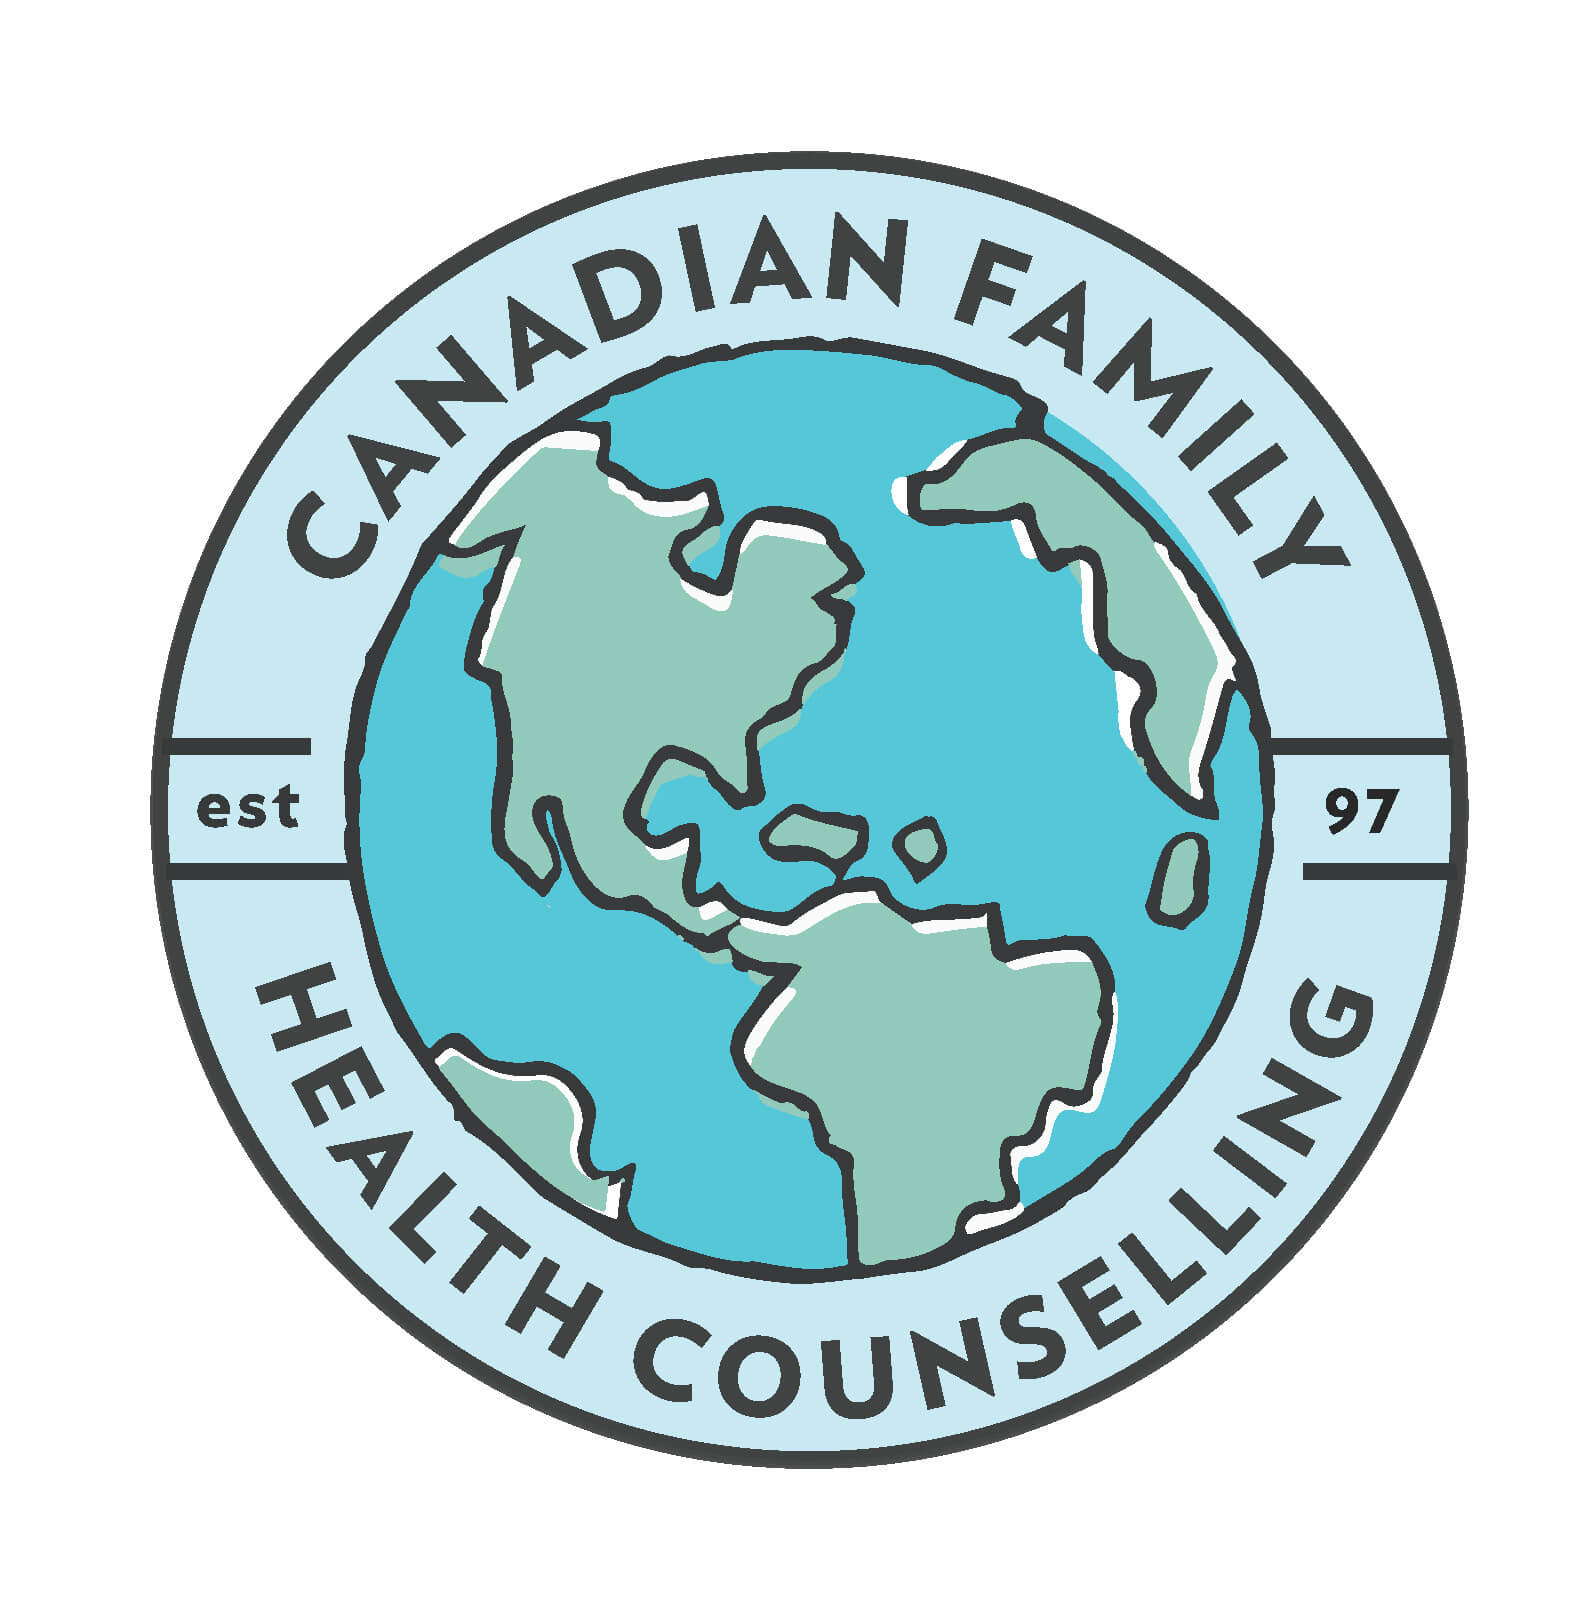 Winner Image - Canadian Family Health Collective